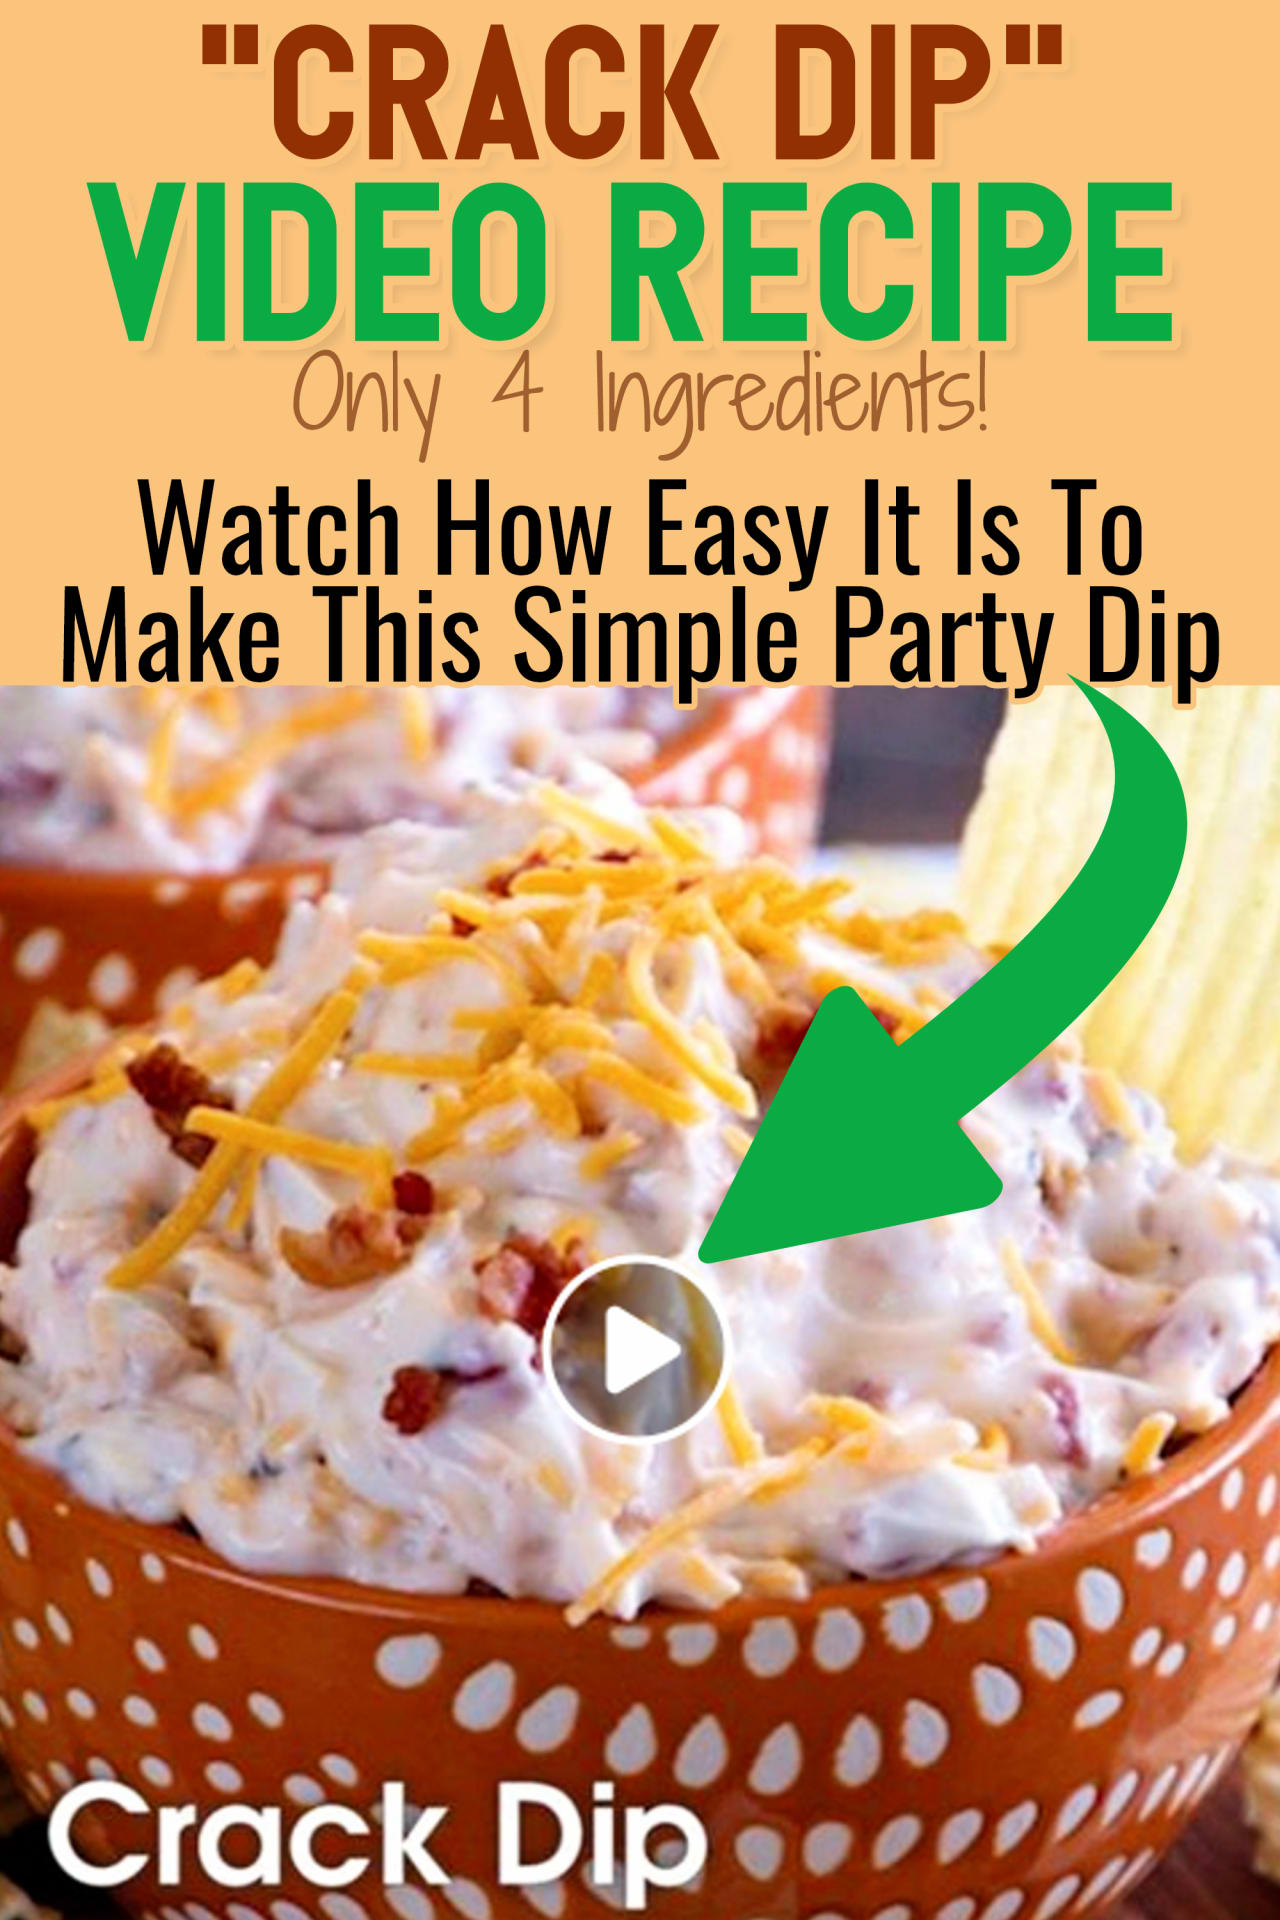 Party Dips Easy Crowd Pleasers - this Super Simple crowd pleasing appetizer is Homemade Ranch Dip Recipe for Chips and has only 4 ingredients - bacon, cheese, sour cream and Hidden Valley ranch dip mix.  Families LOVE it - makes easy party food for a crowd - if you need easy make ahead chip dip recipes for your party appetizers for your BBQ cookout, holiday party, baby or wedding shower, potluck, family reunion, summer neighborhood block party or for any party with a large group - this party dip video recipe is a crowd pleaser!